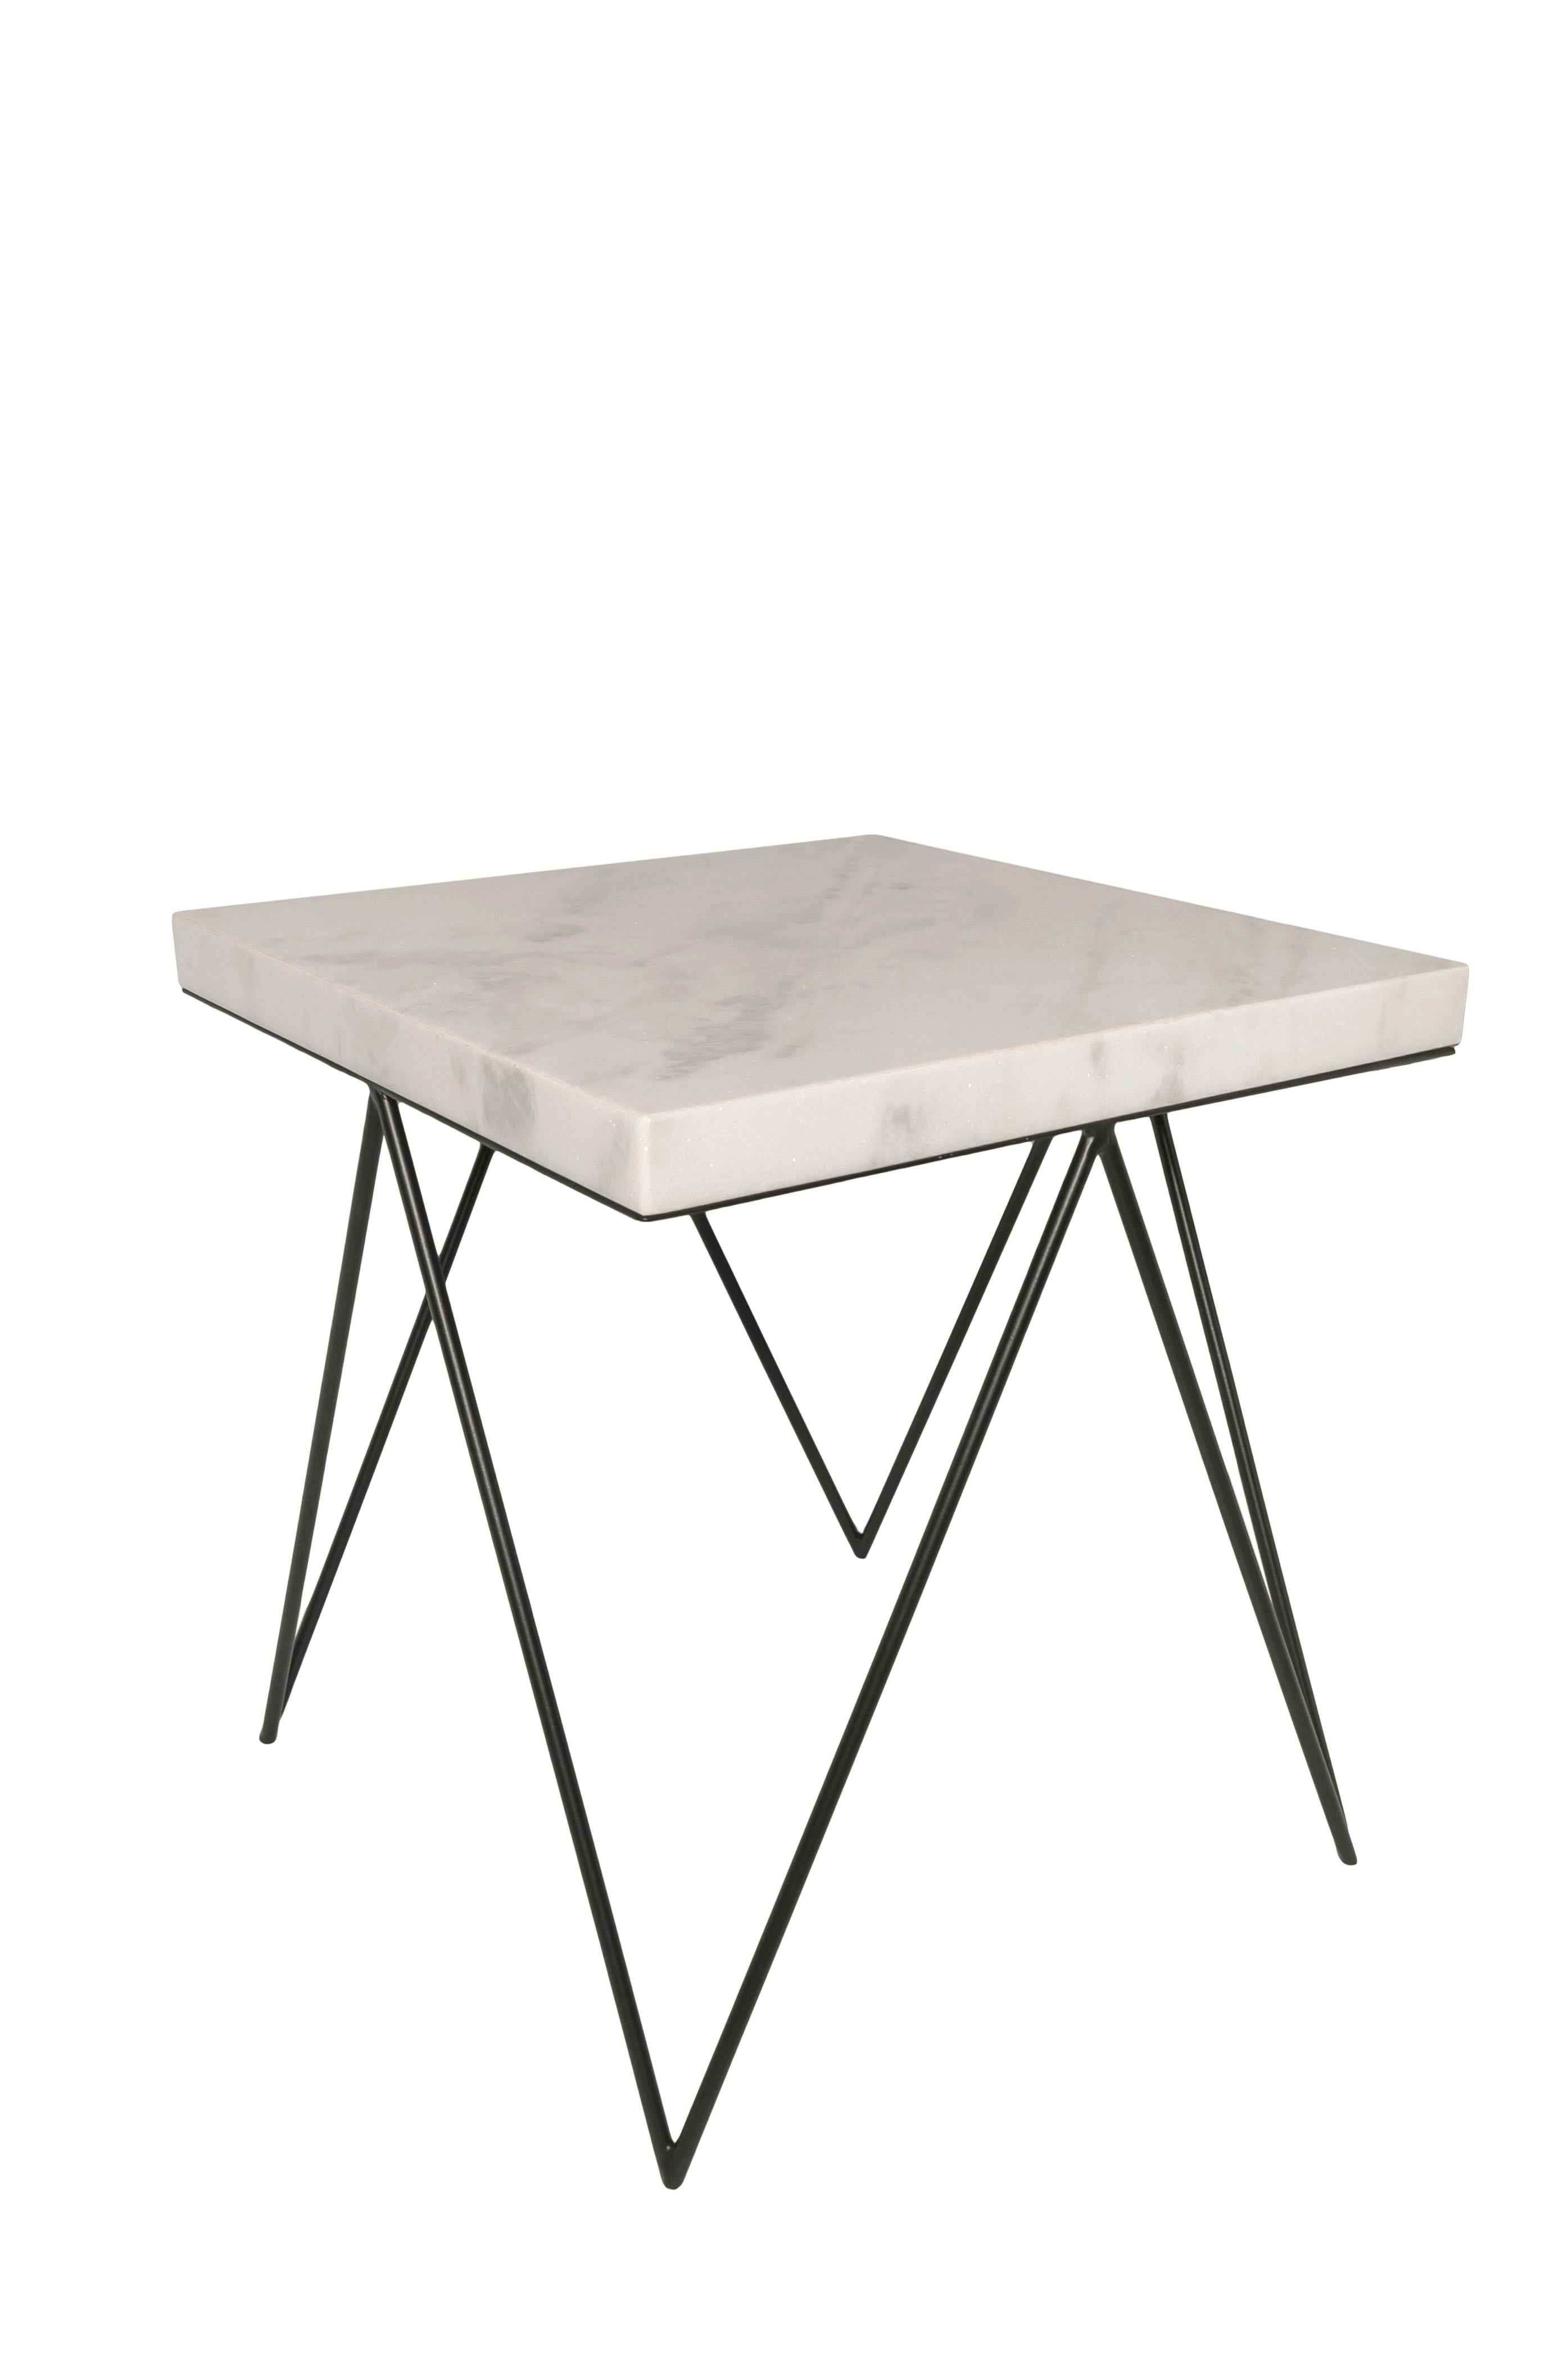 Chakra table by Roberta Rampazzo
Current Production
Dimensions: W 50 x D 50 x H 55 cm
Materials: Piguês White Marble
Also Available: Nero Marquina, Piguês White,

Designed with simple but strong lines, the table Chakra represents our constant